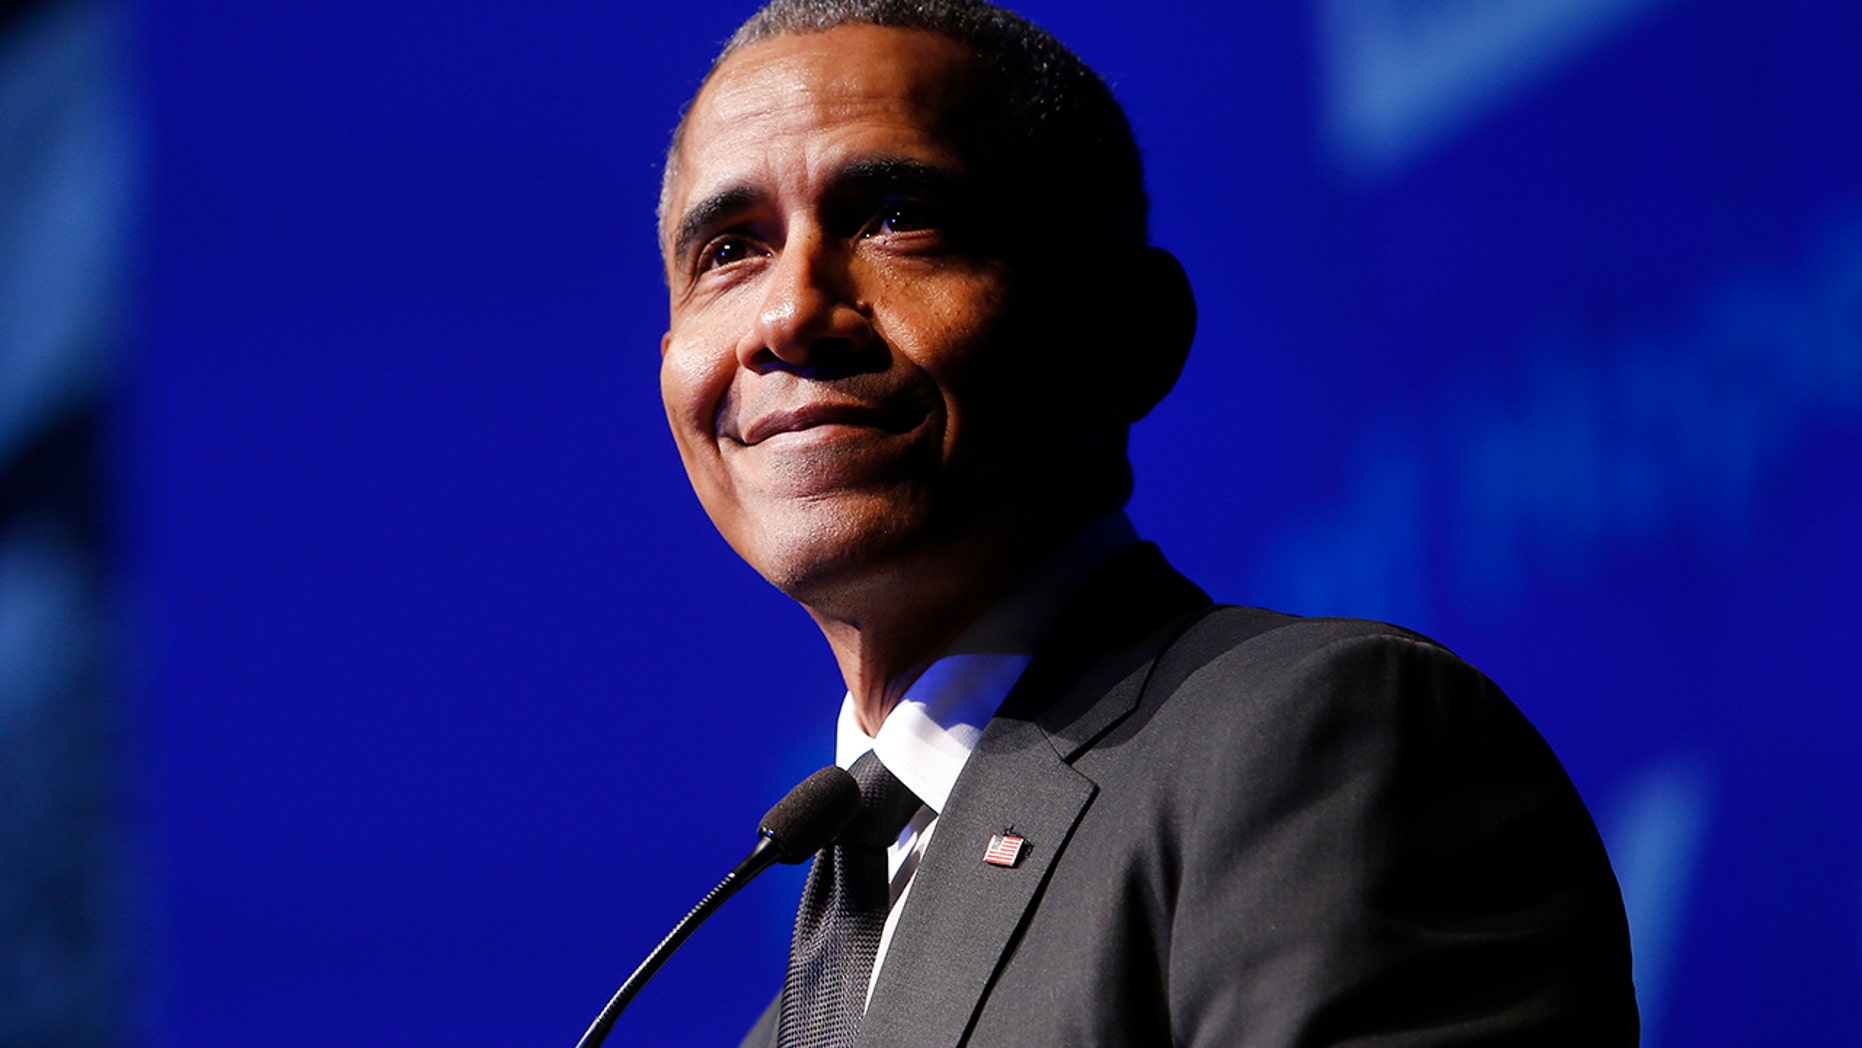 Obama makes debut on Billboard chart with 